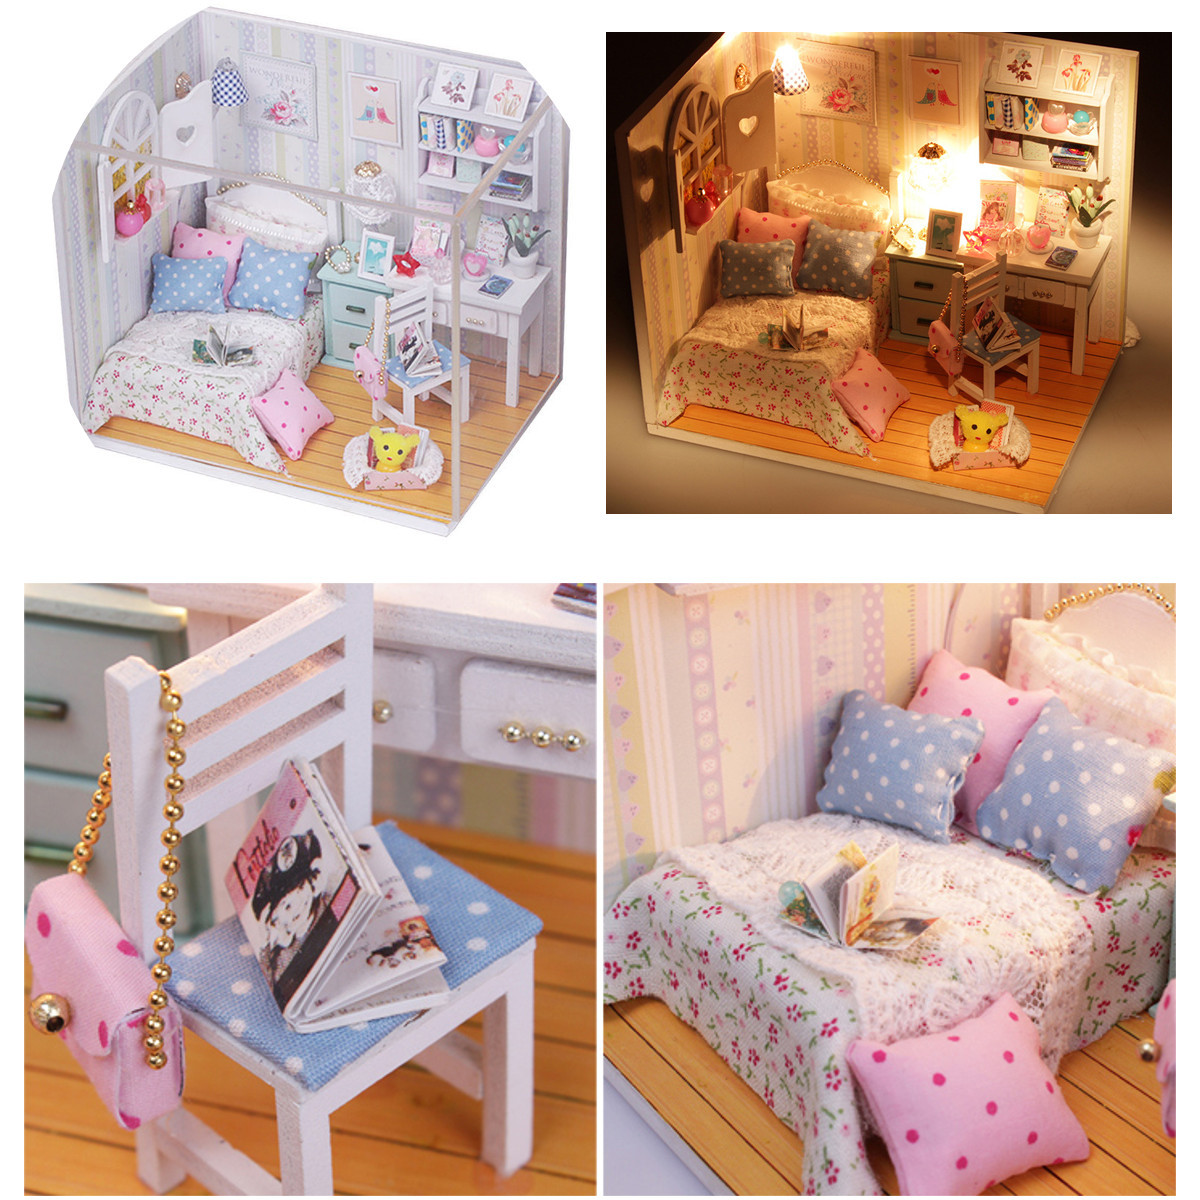 Hoomeda-DIY-Wood-Dollhouse-Miniature-With-LED-Furniture-Cover-Doll-House-Room-1019741-1